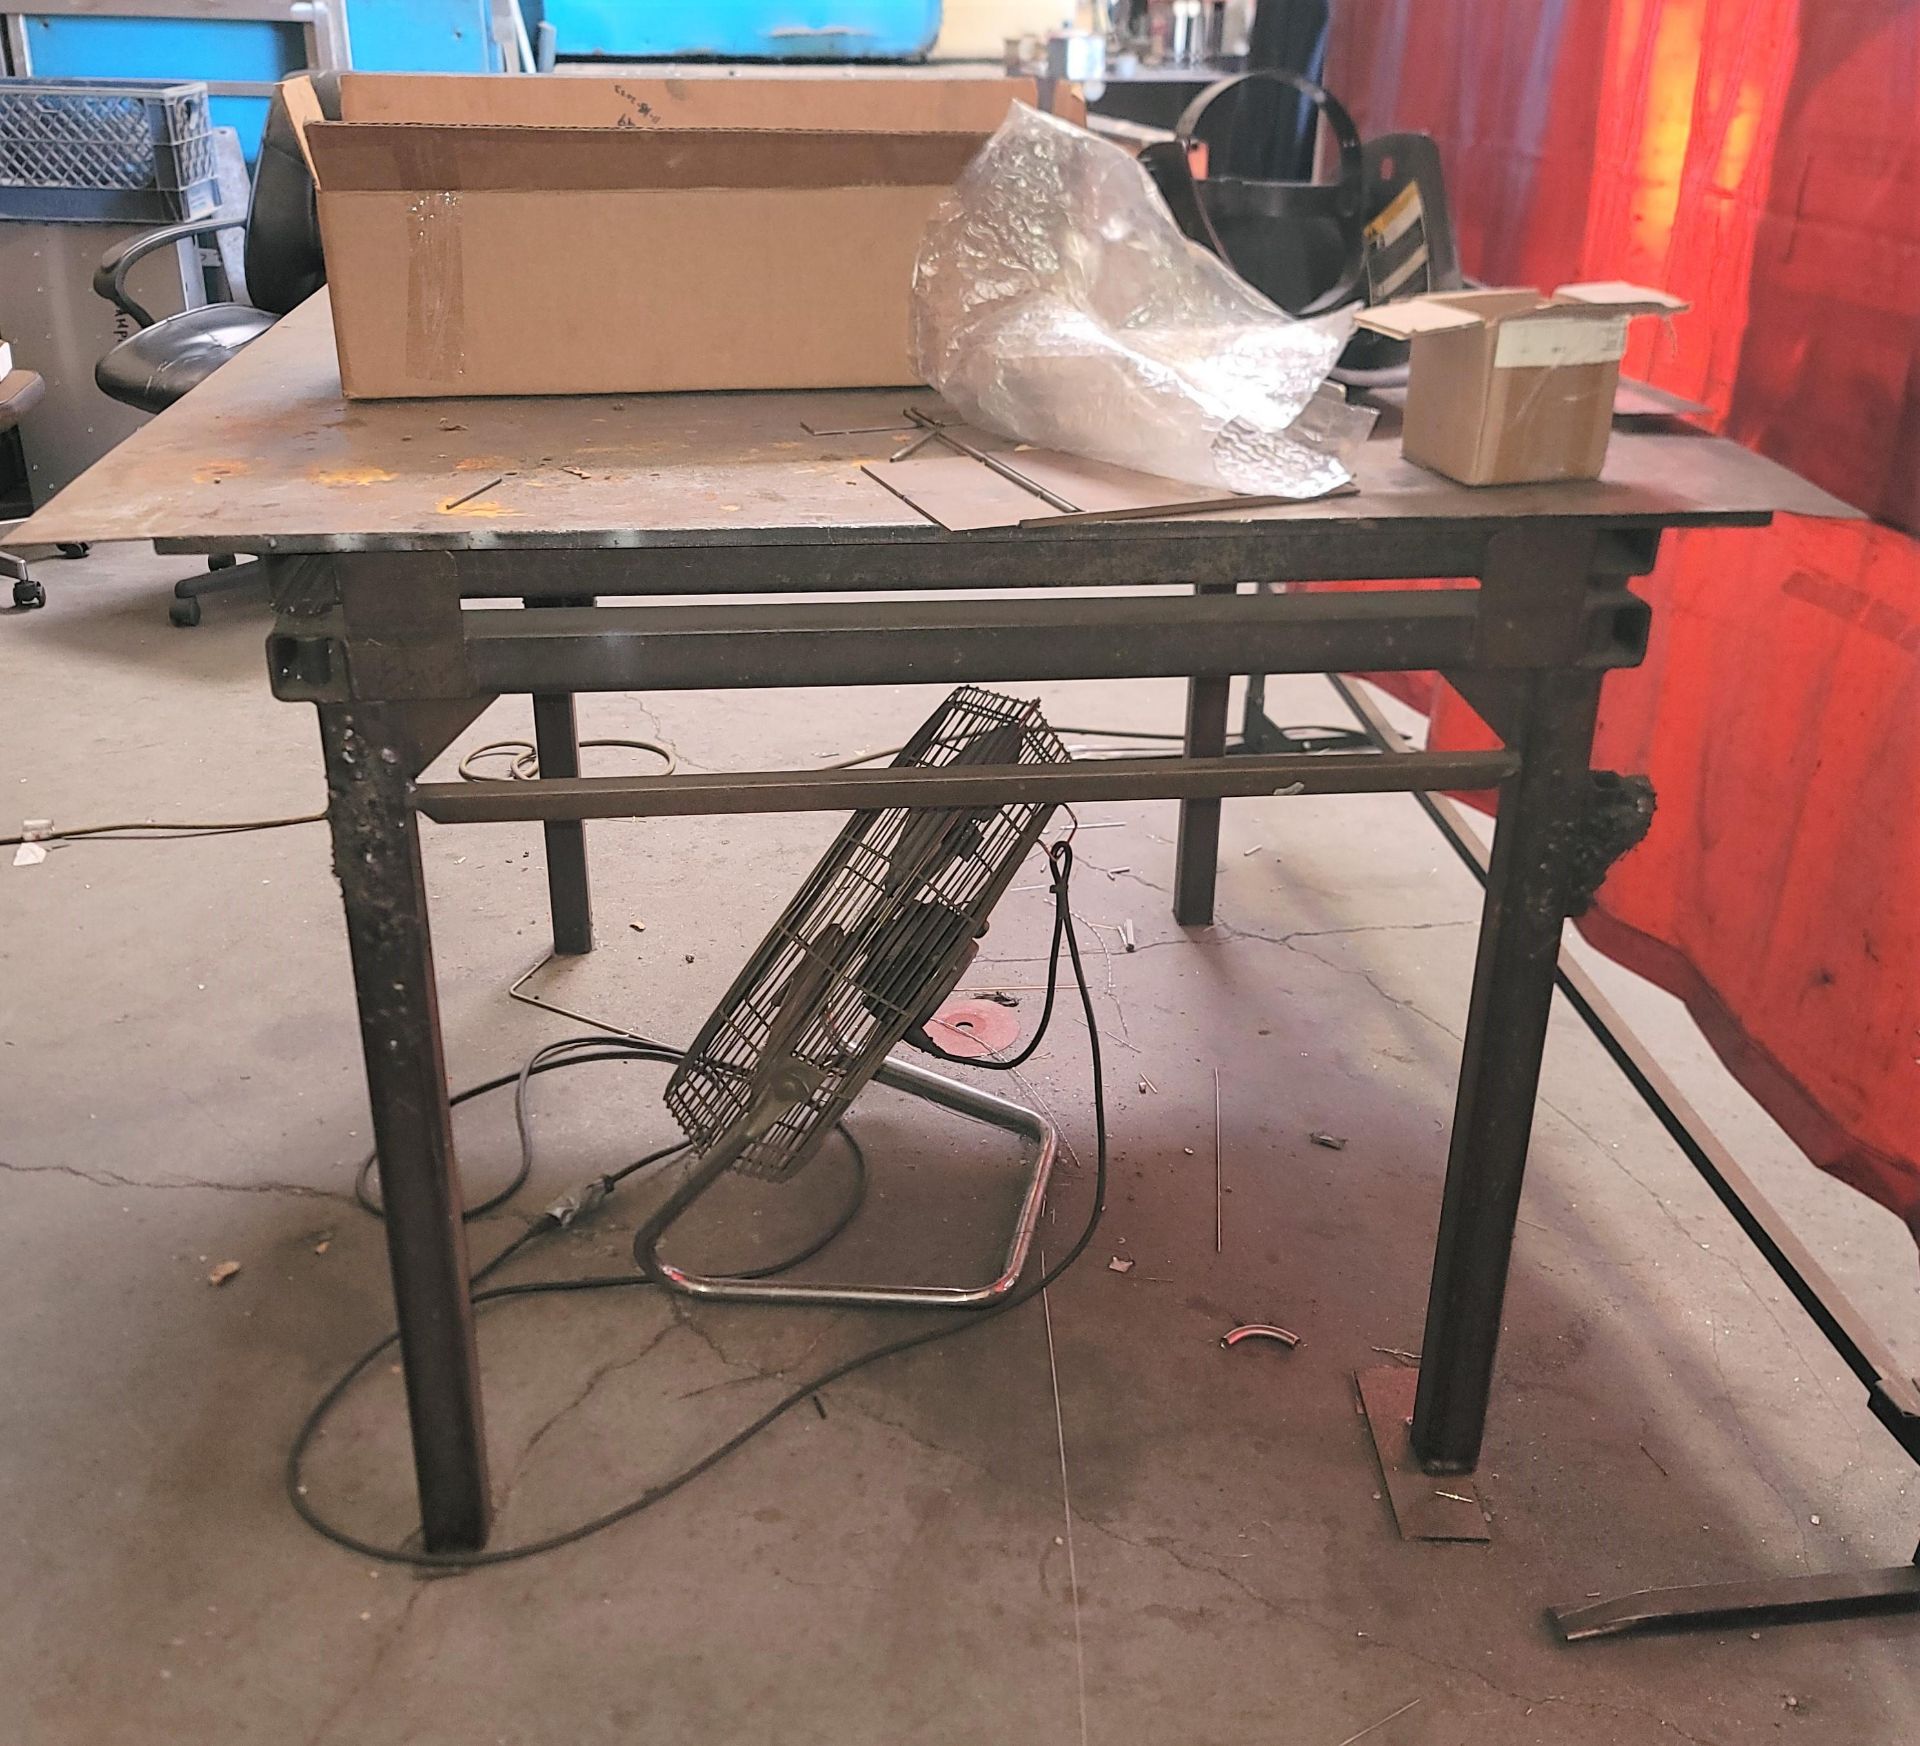 WELDING TABLE, 41" X 48" X 3/8" THICK, 35-1/2" TOP HEIGHT, TABLE ONLY, CONTENTS ARE NOT INCLUDED - Image 2 of 2